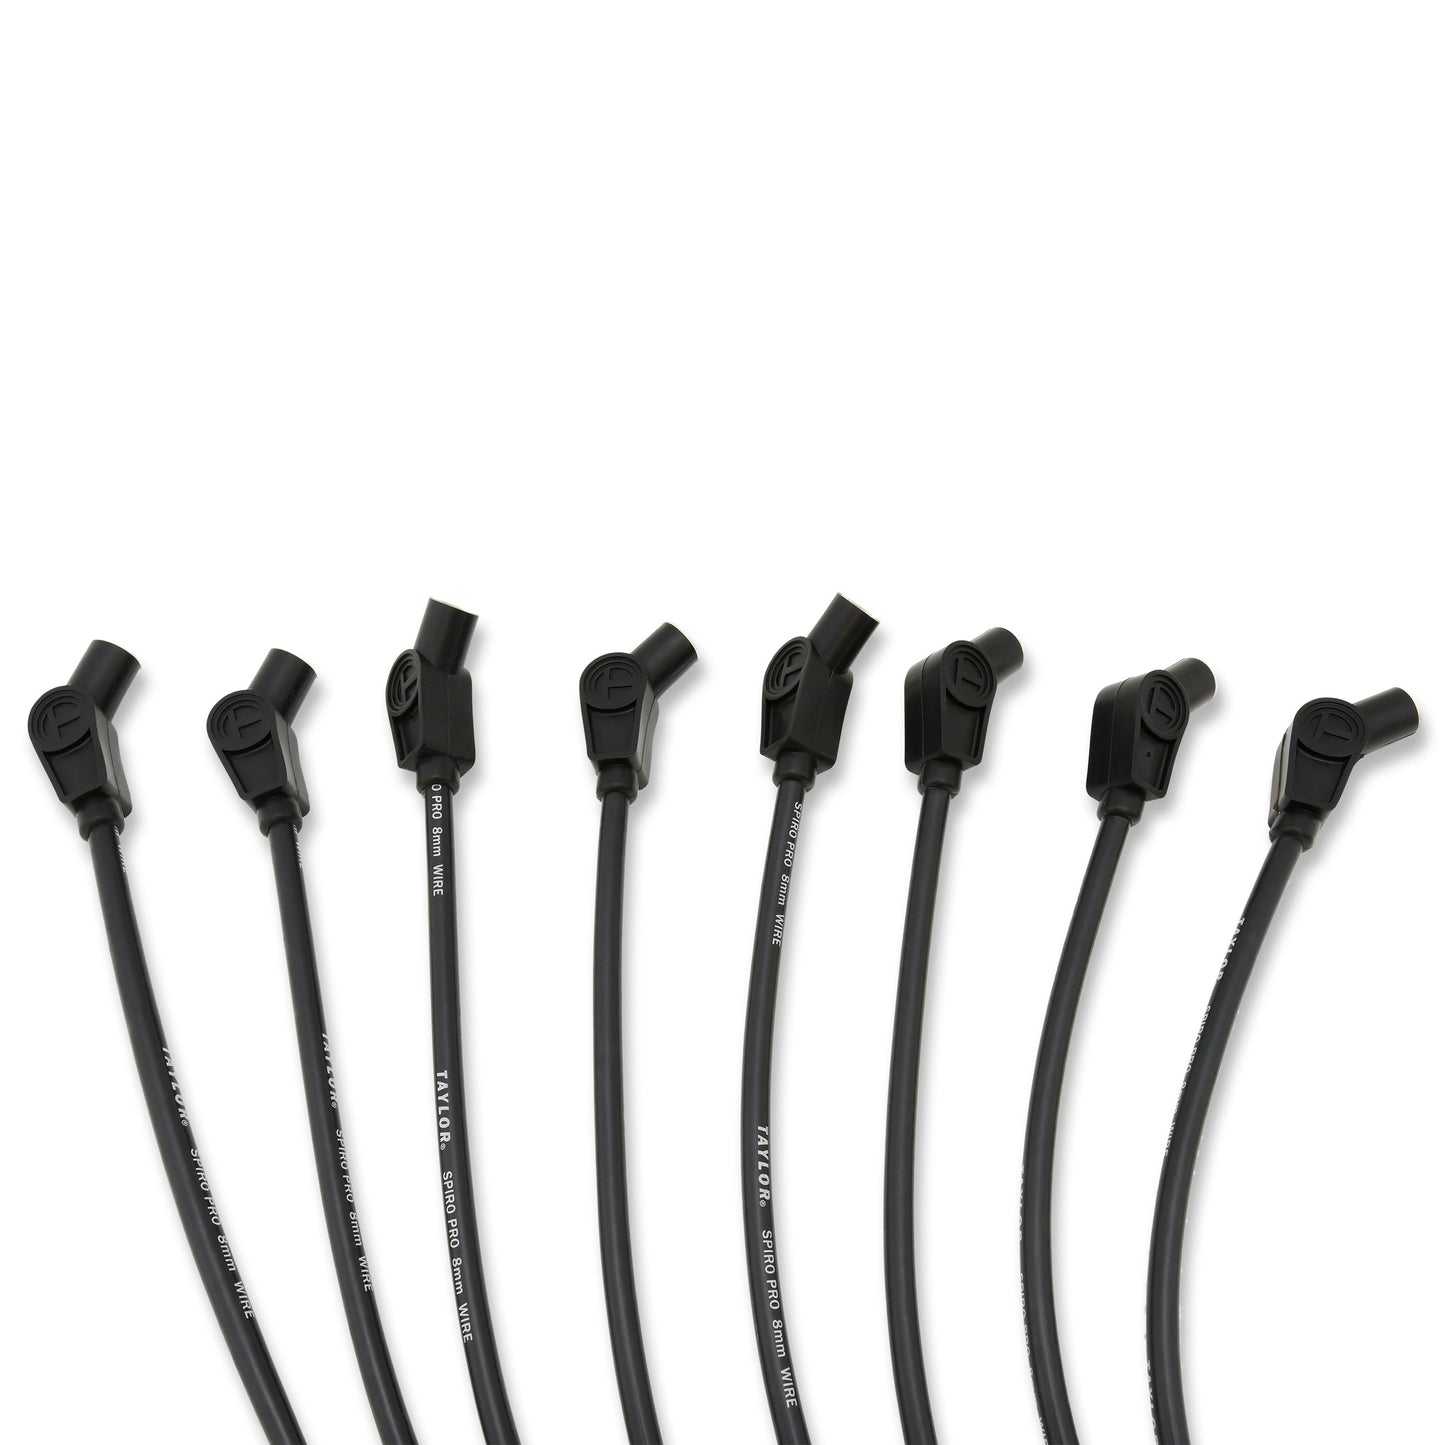 Taylor Cable 76031 8mm Spiro Pro Race Fit Spark Plug Wires 135° Black